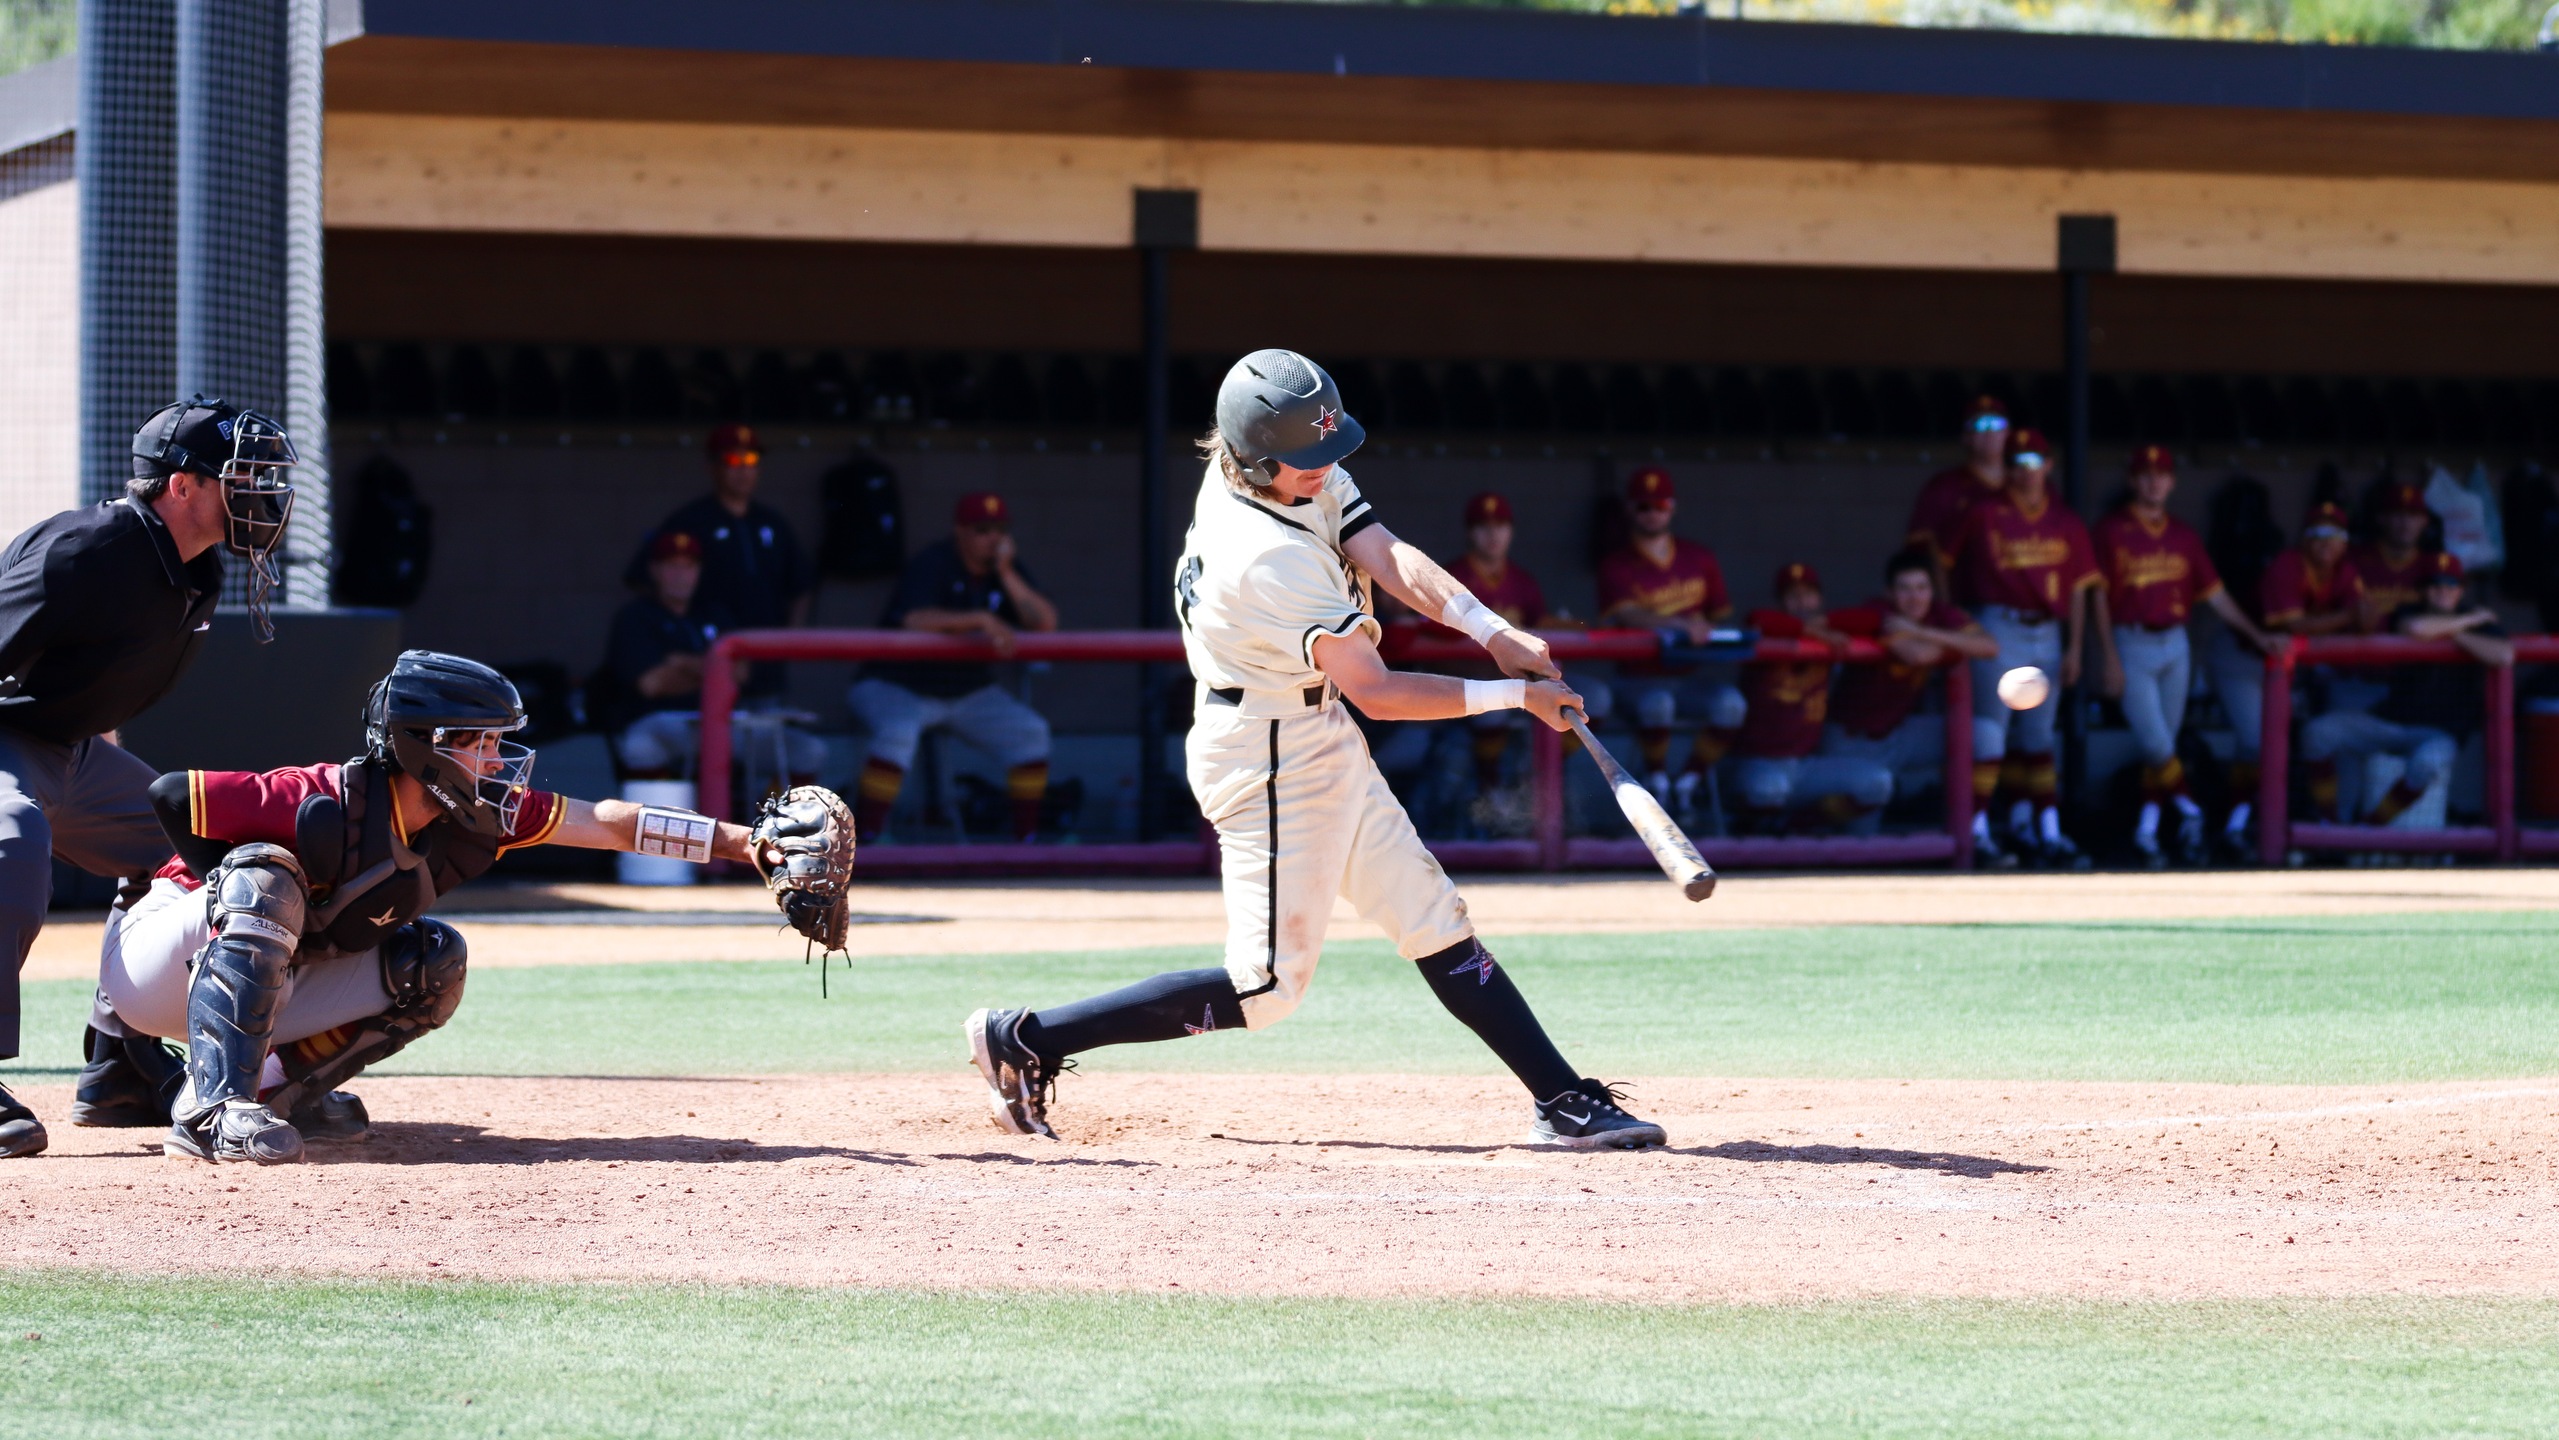 Kyle Harvey went 2-3 with three RBI. Photo by Cara Heise.